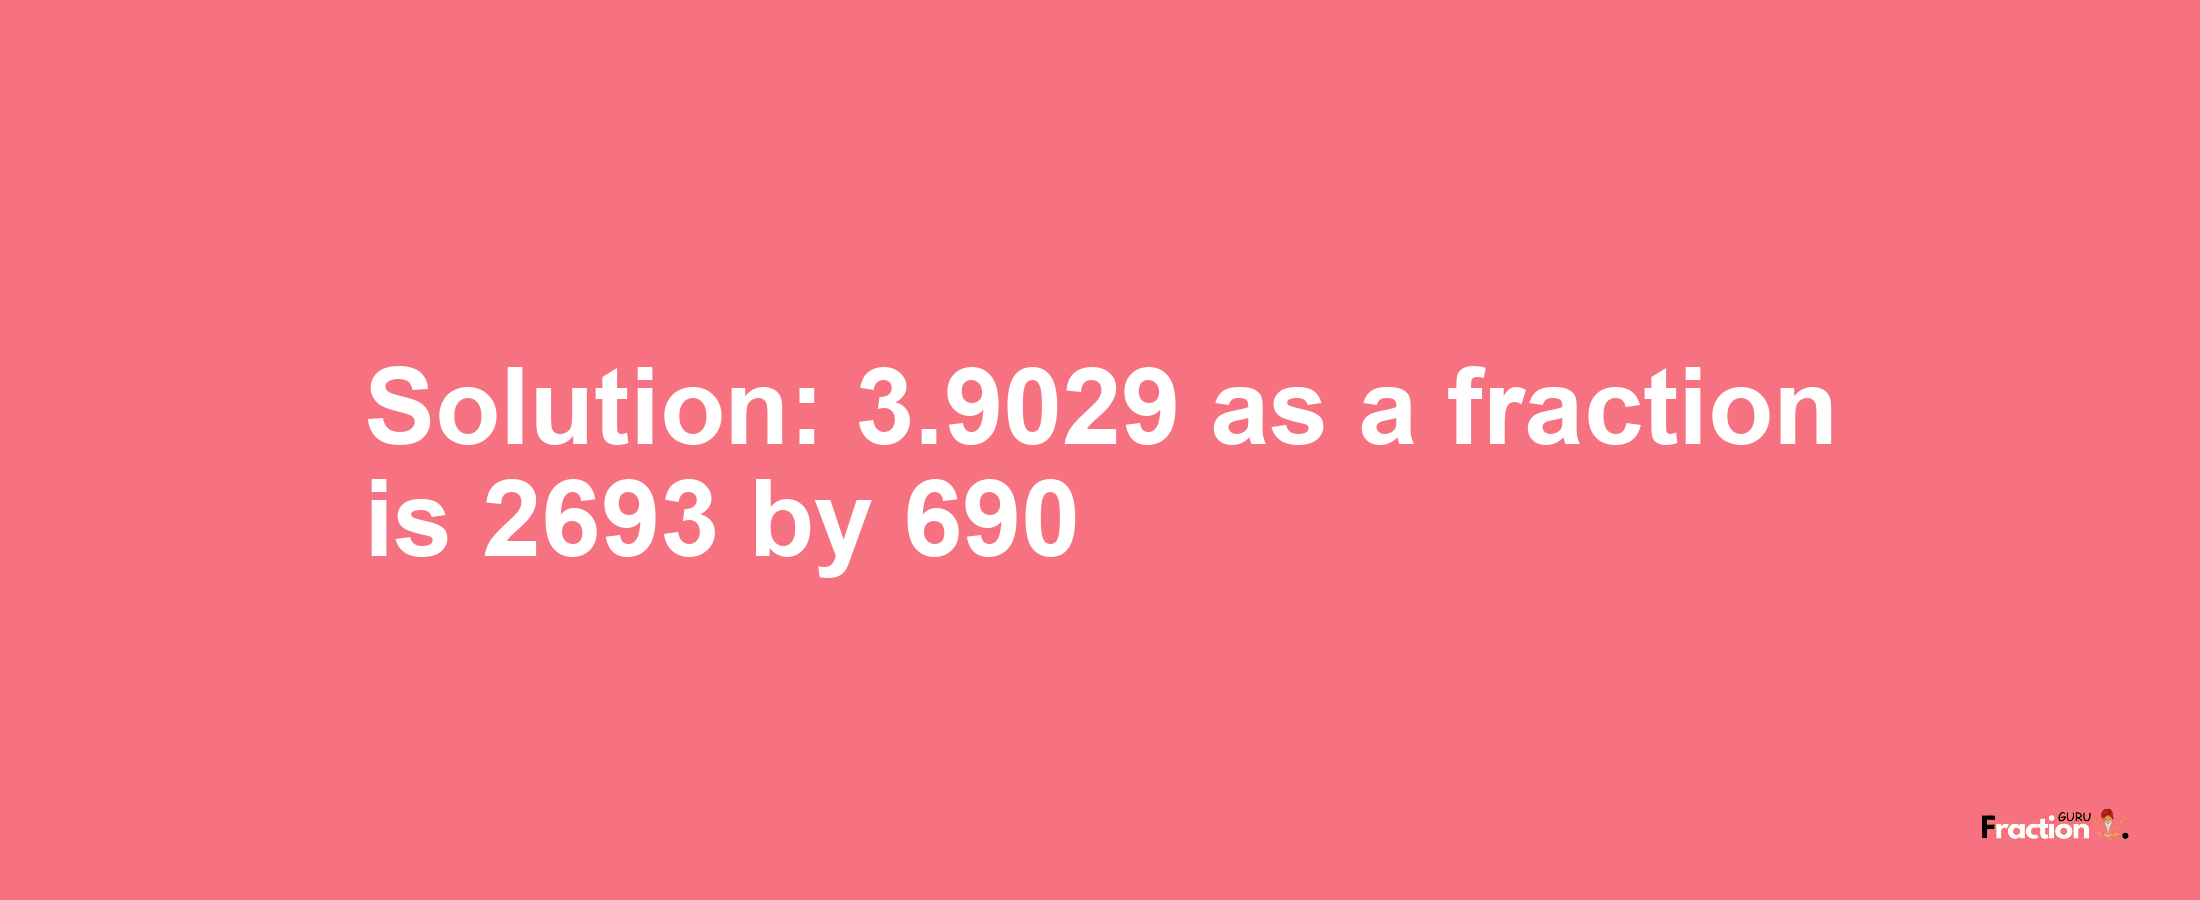 Solution:3.9029 as a fraction is 2693/690